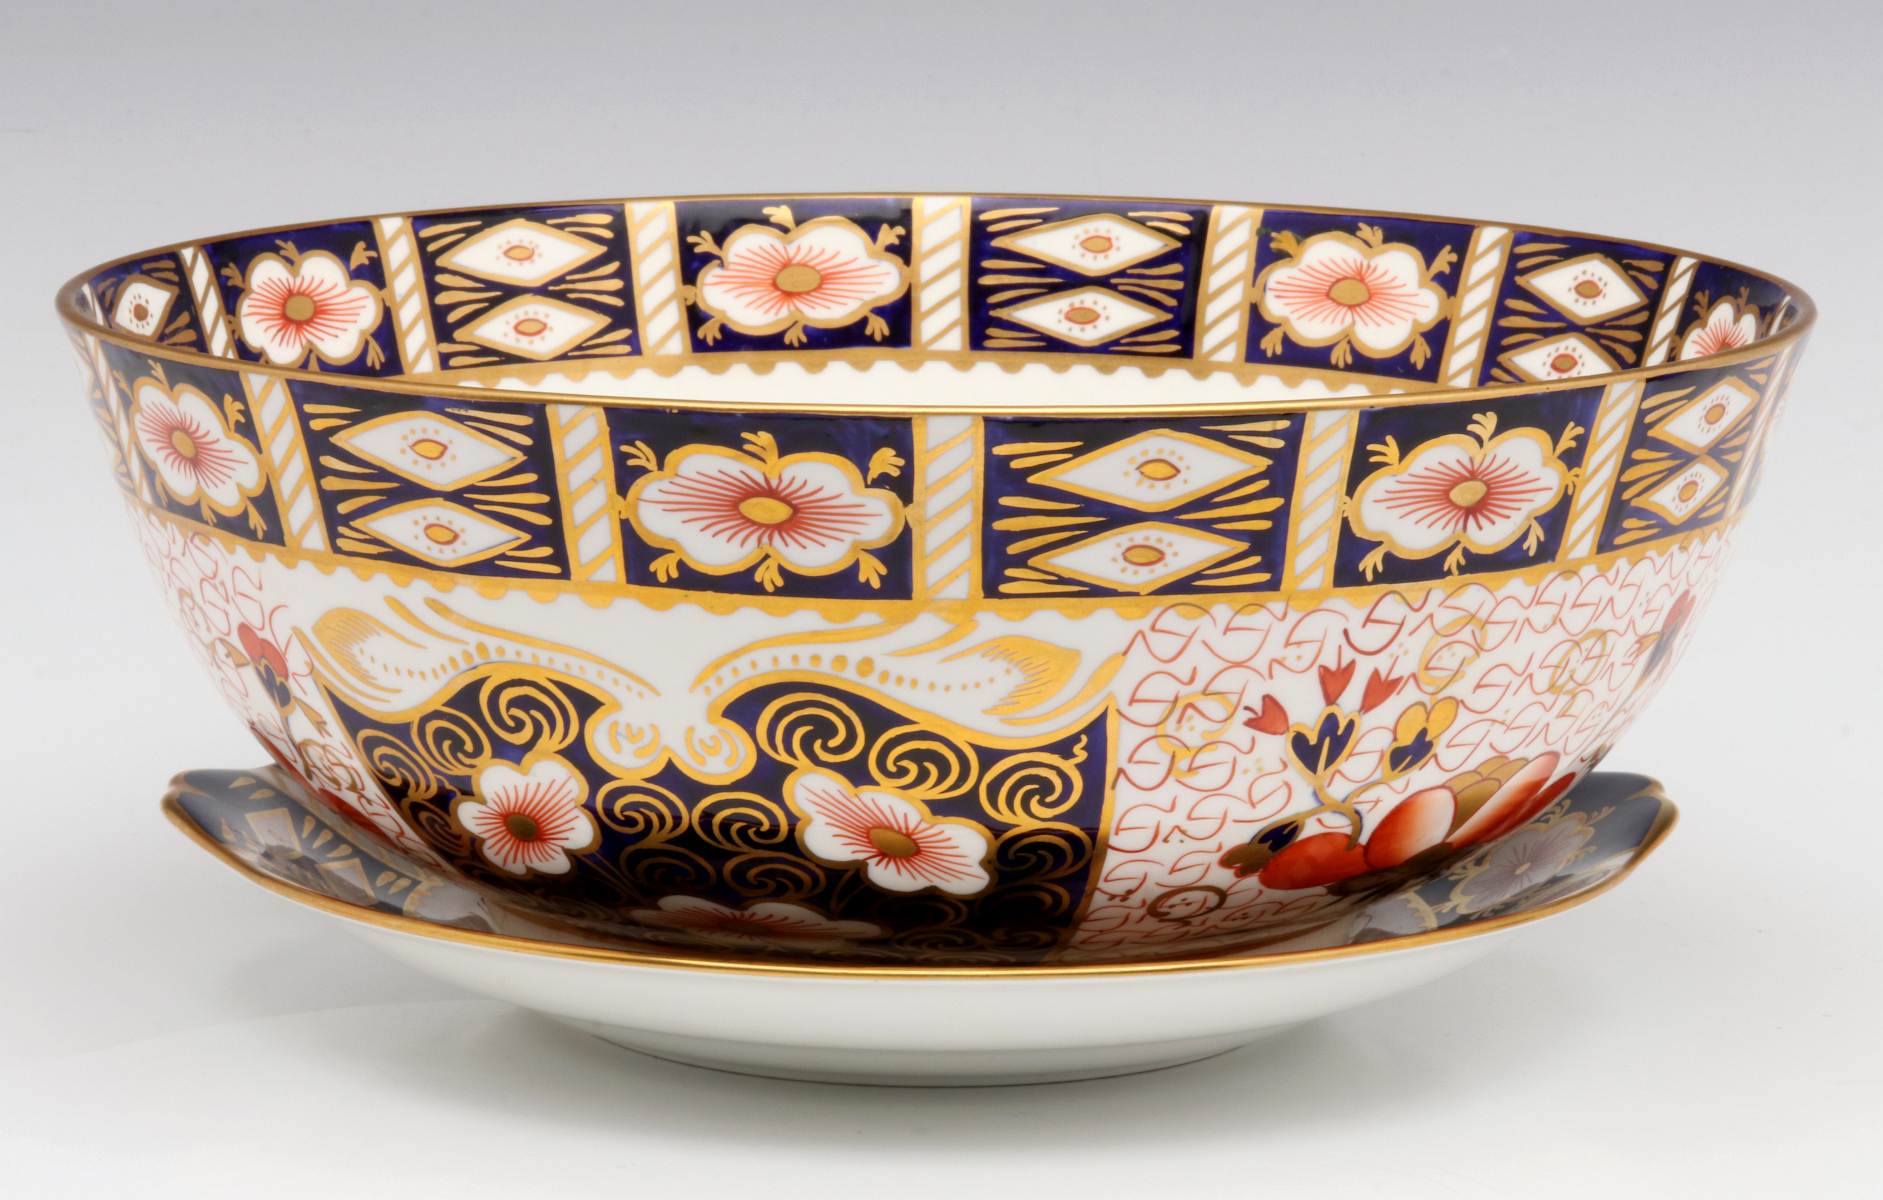 LARGE ROYAL CROWN DERBY BOWL WITH HANDLED PLATE